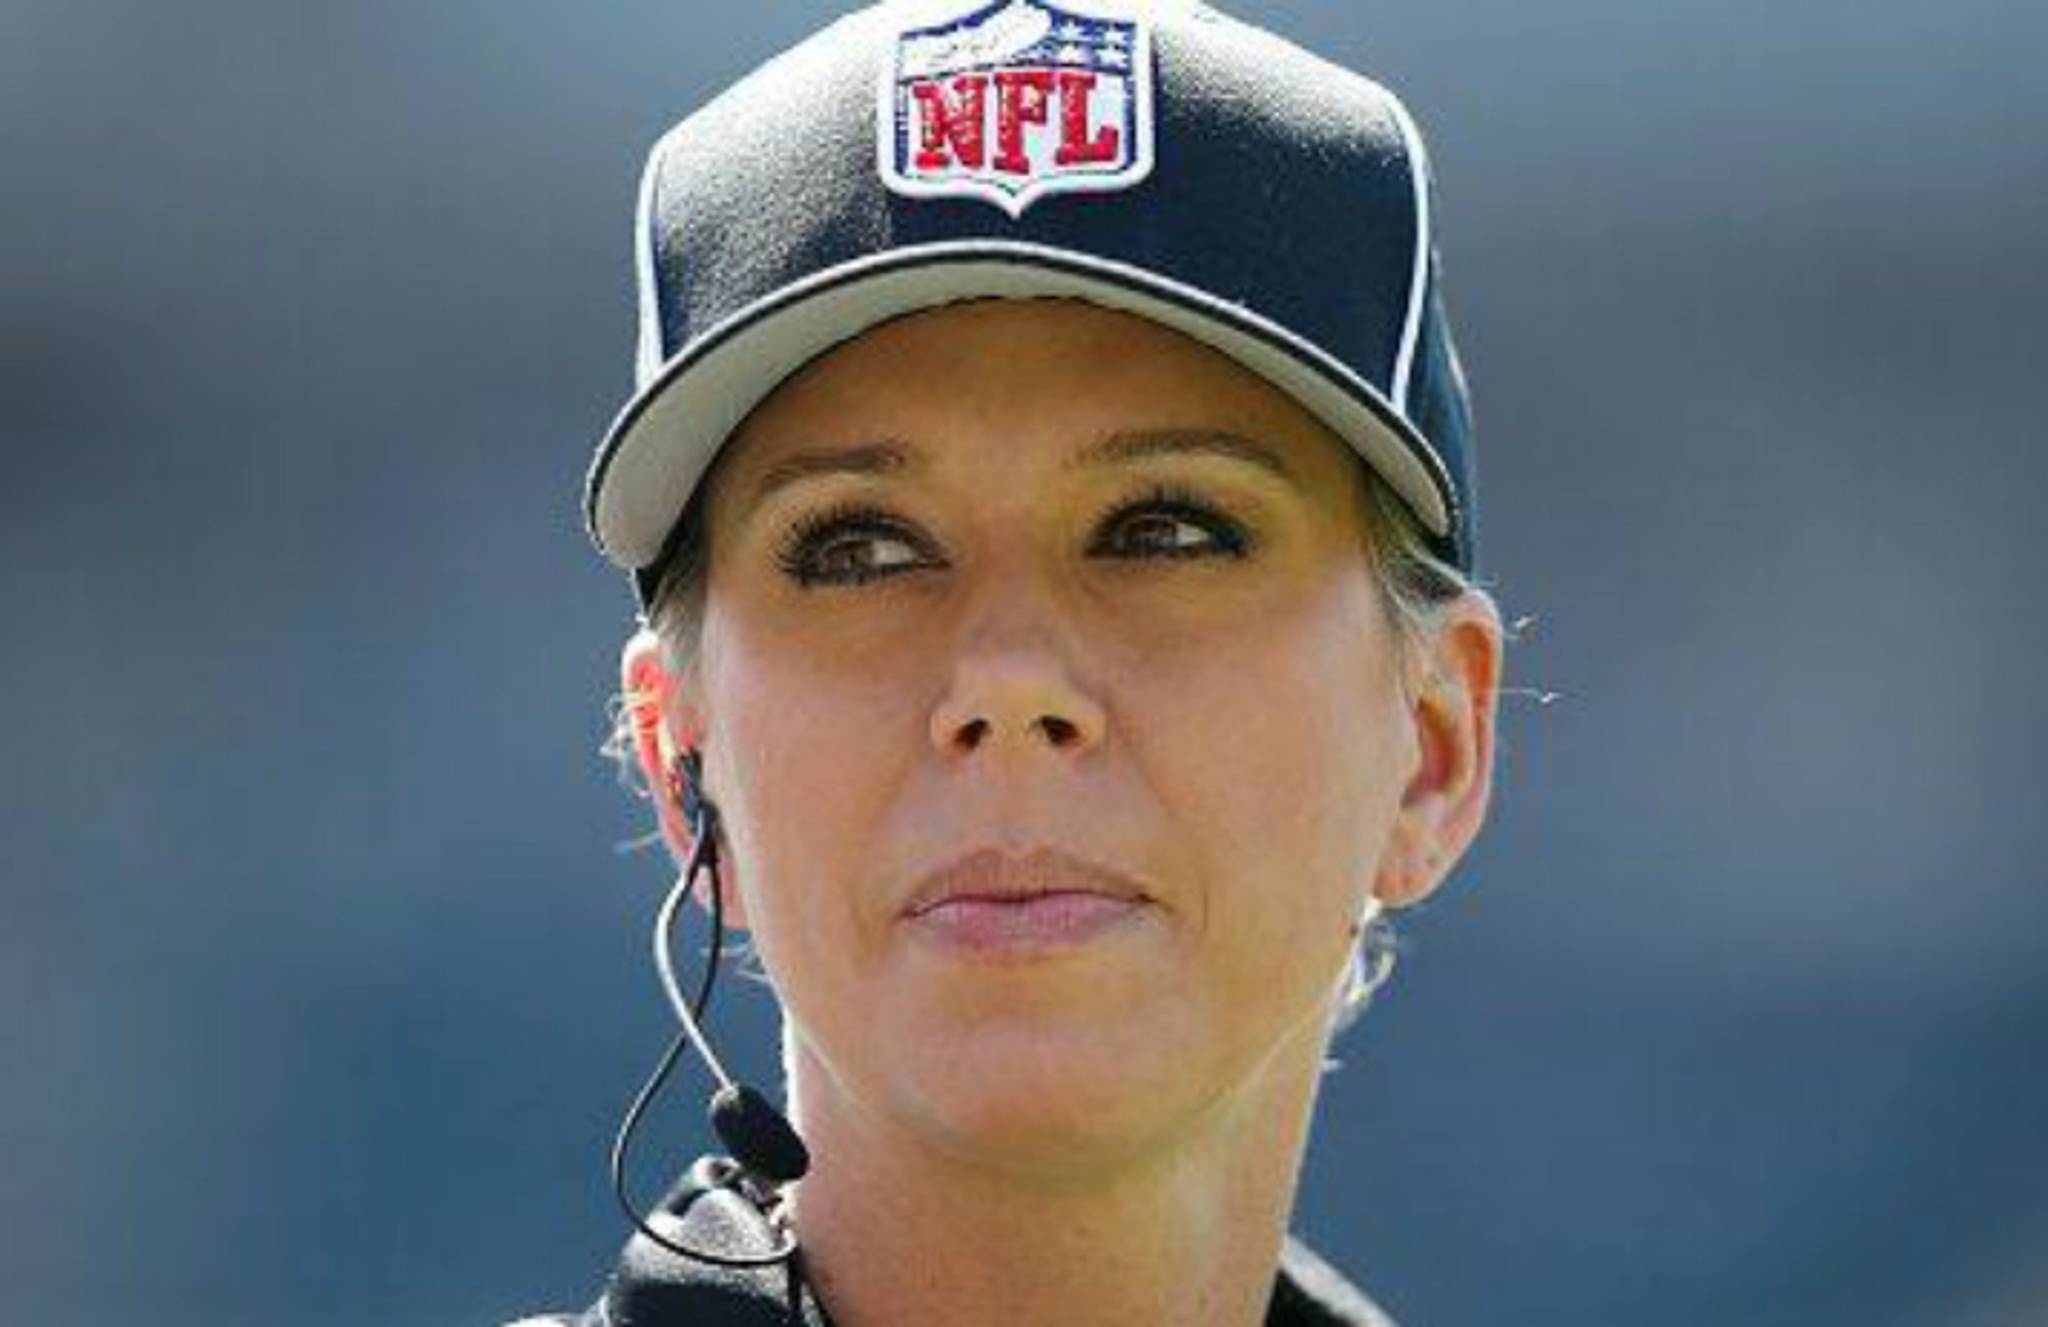 NFL push gender inclusivity with female 'down judge'